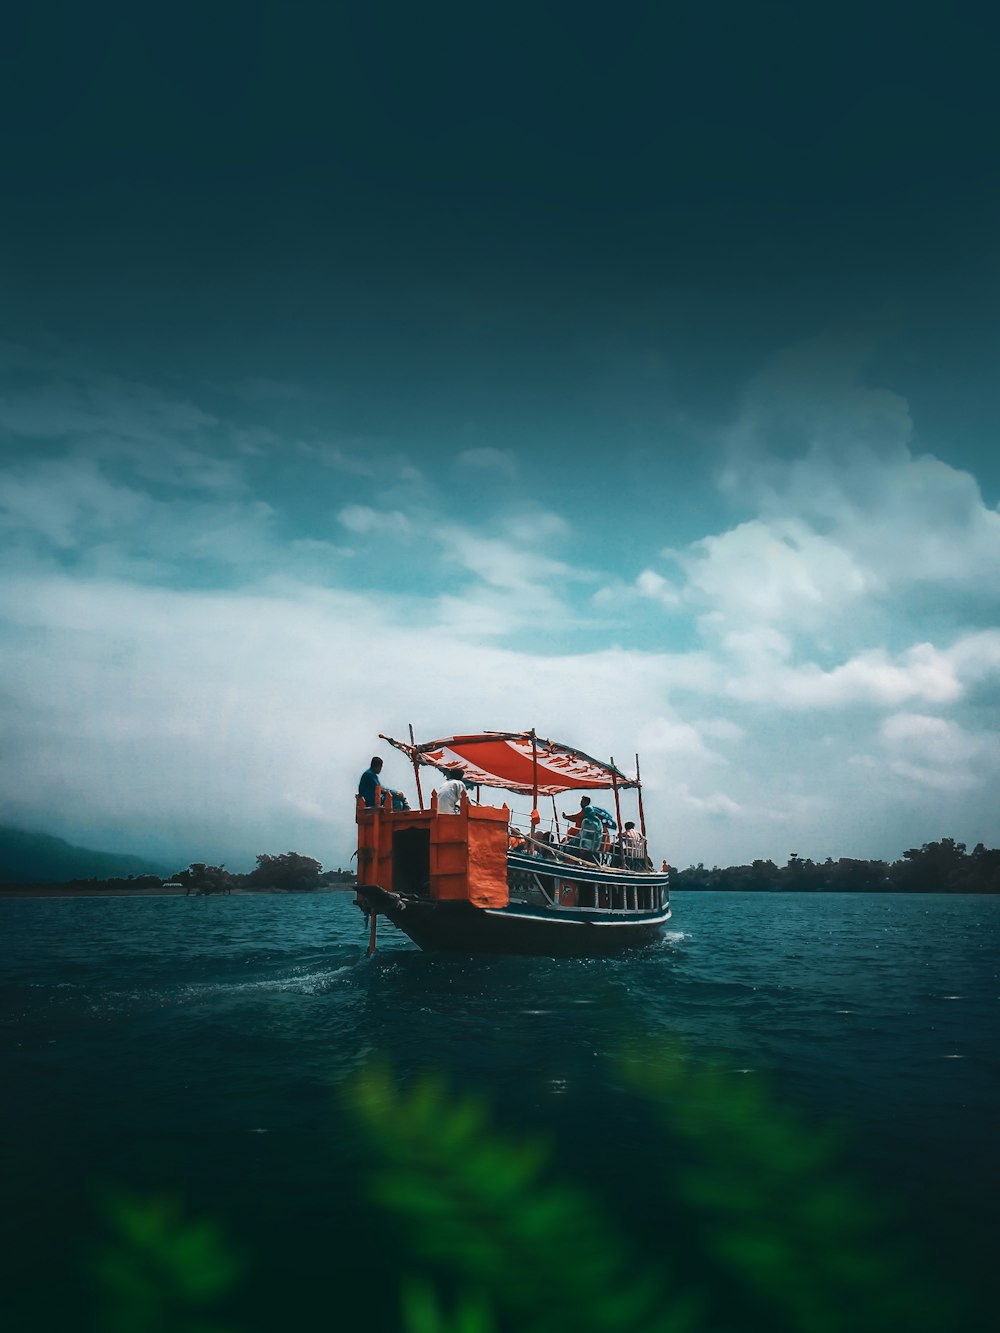 350+ Bangladesh Pictures [HD] | Download Free Images on Unsplash